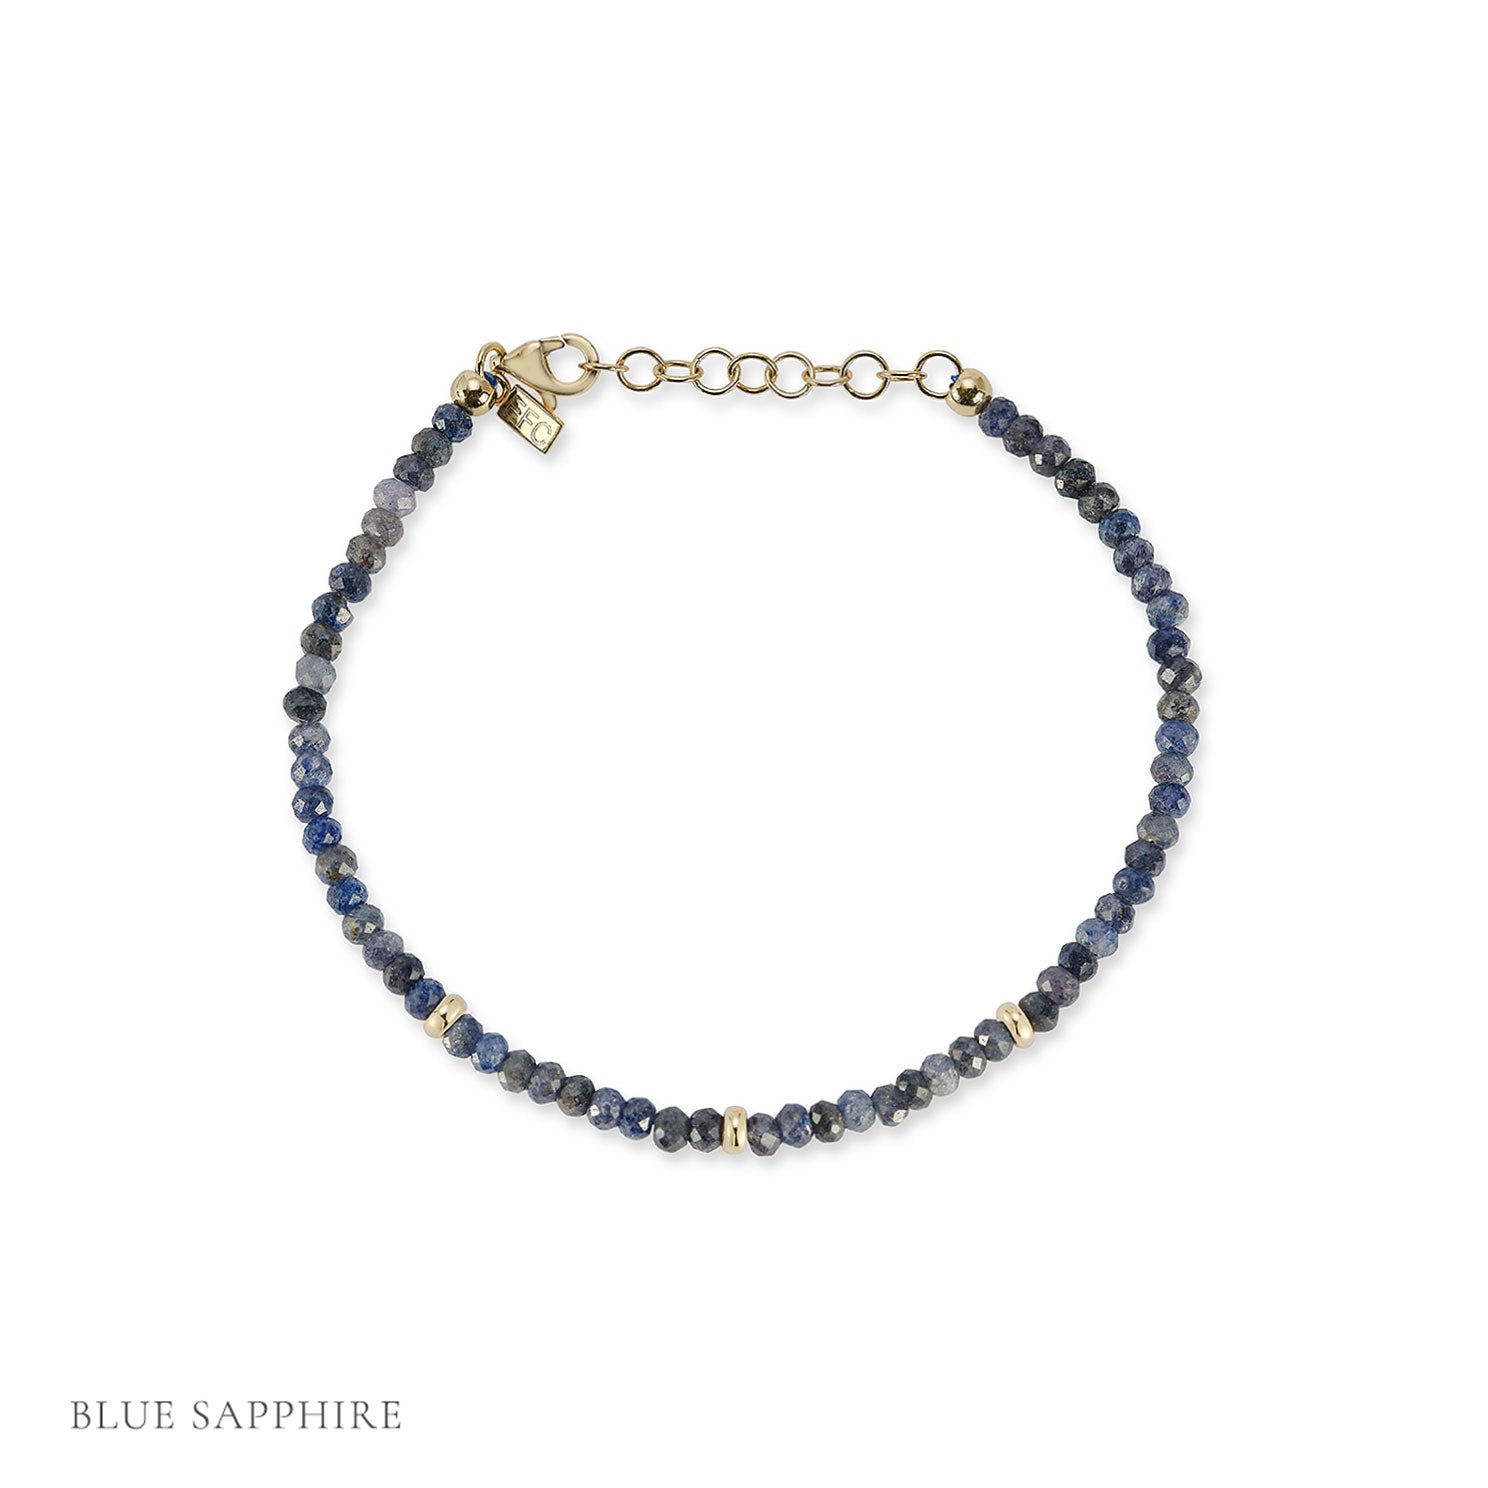 Birthstone Bead Bracelet In Blue Sapphire with 14k yellow gold chain